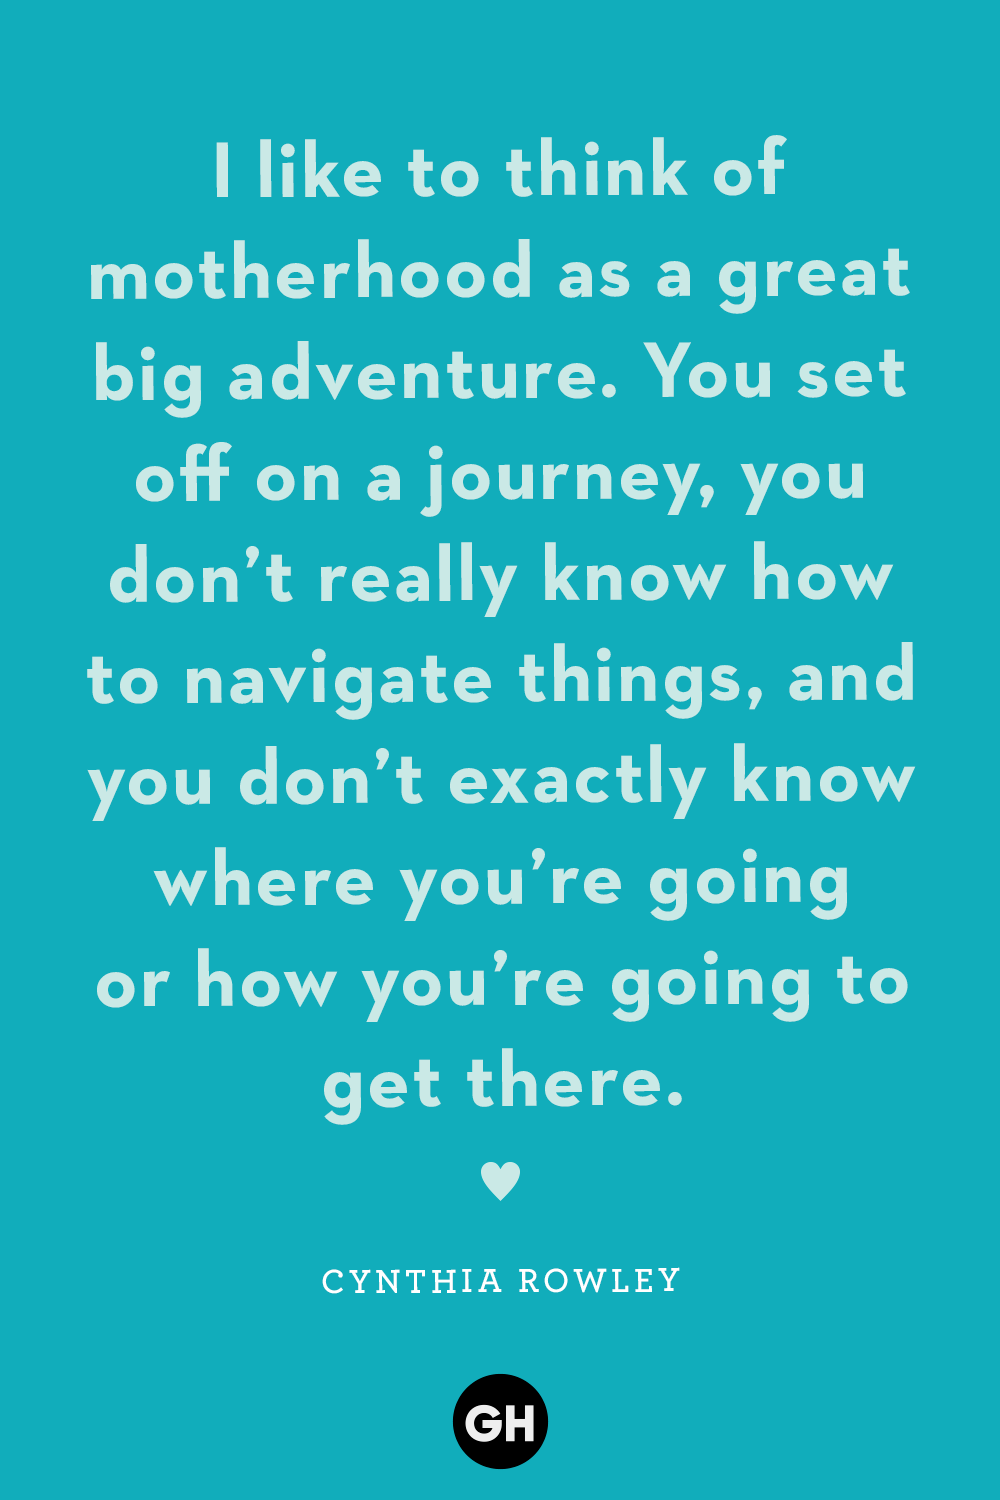 New motherhood can come with lots ups and downs. How to navigate